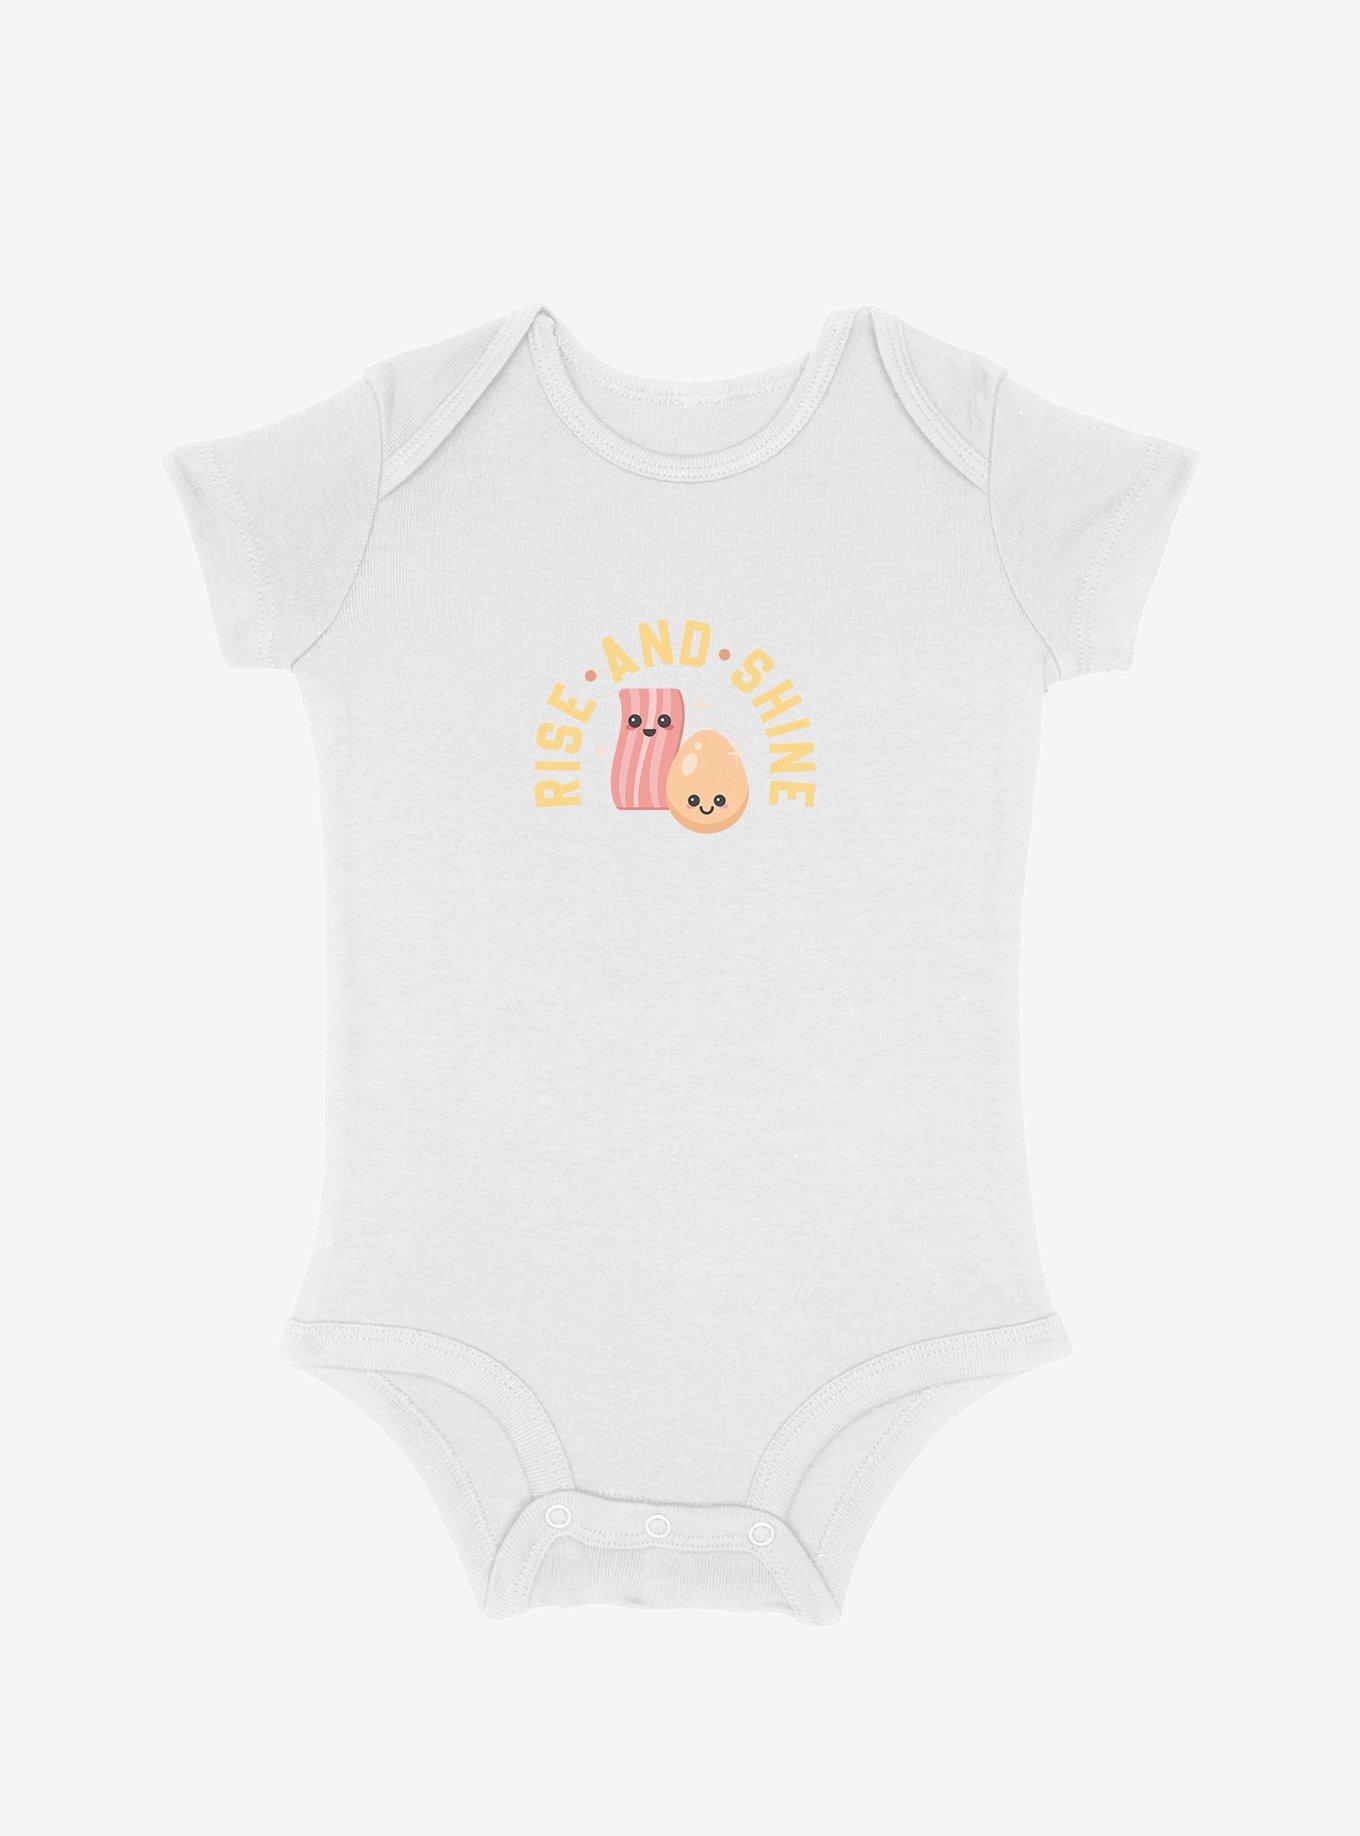 Mommy & Me Rise And Shine Infant Bodysuit, WHITE, hi-res